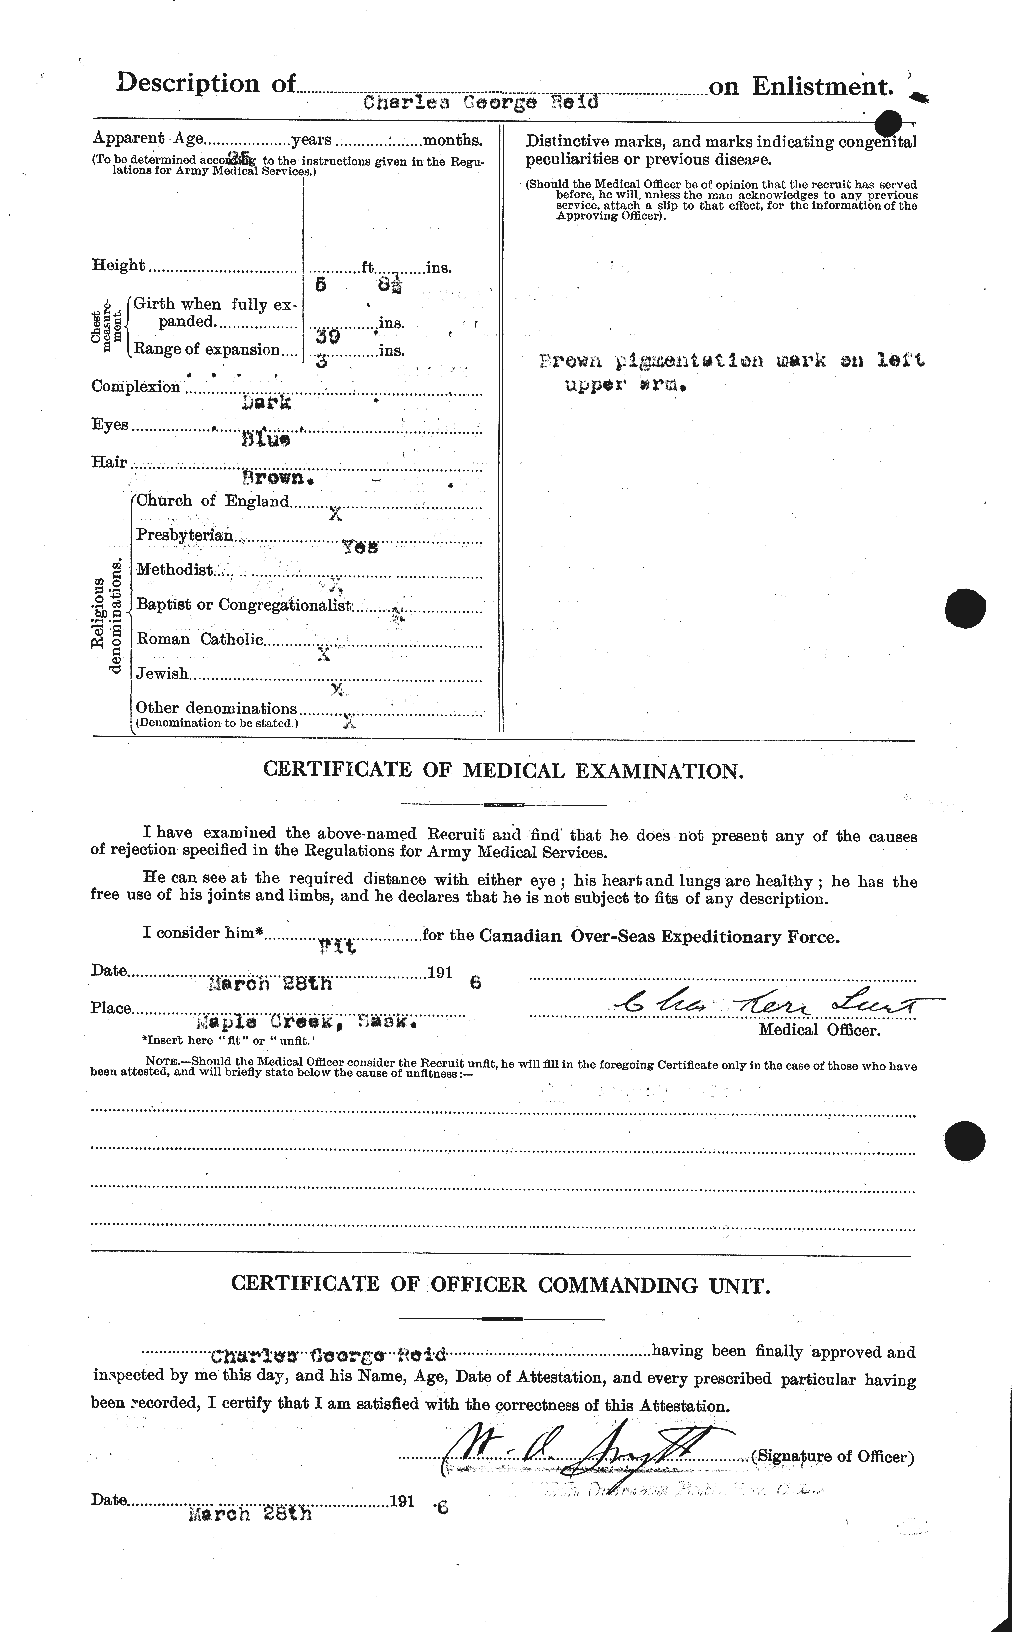 Personnel Records of the First World War - CEF 597888b